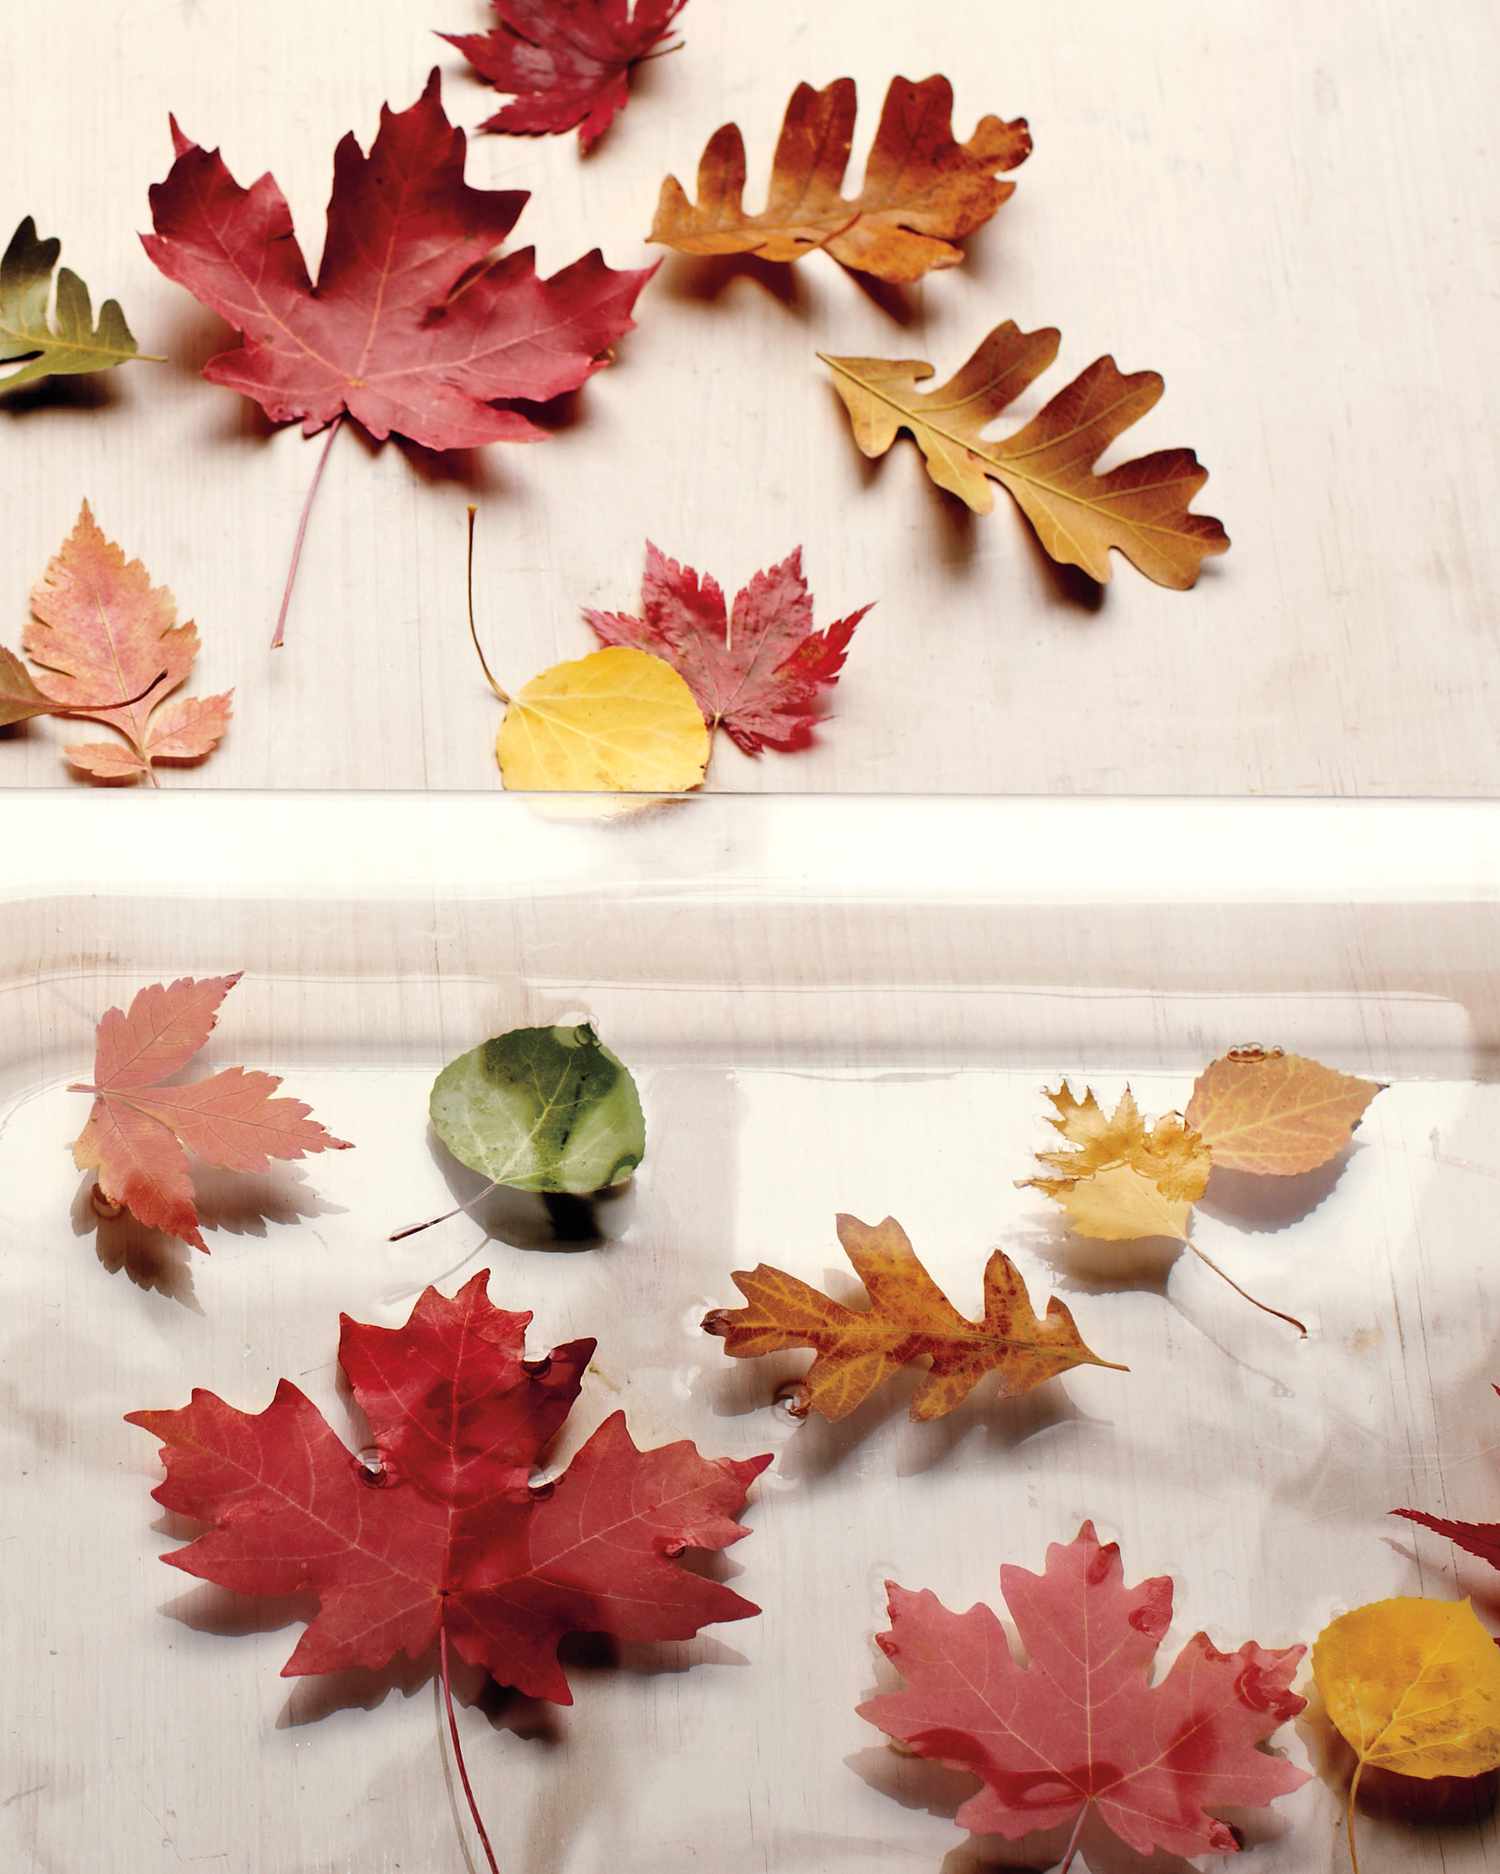 12 Leaf Crafts That Celebrate All the Colors of Fall | Martha Stewart